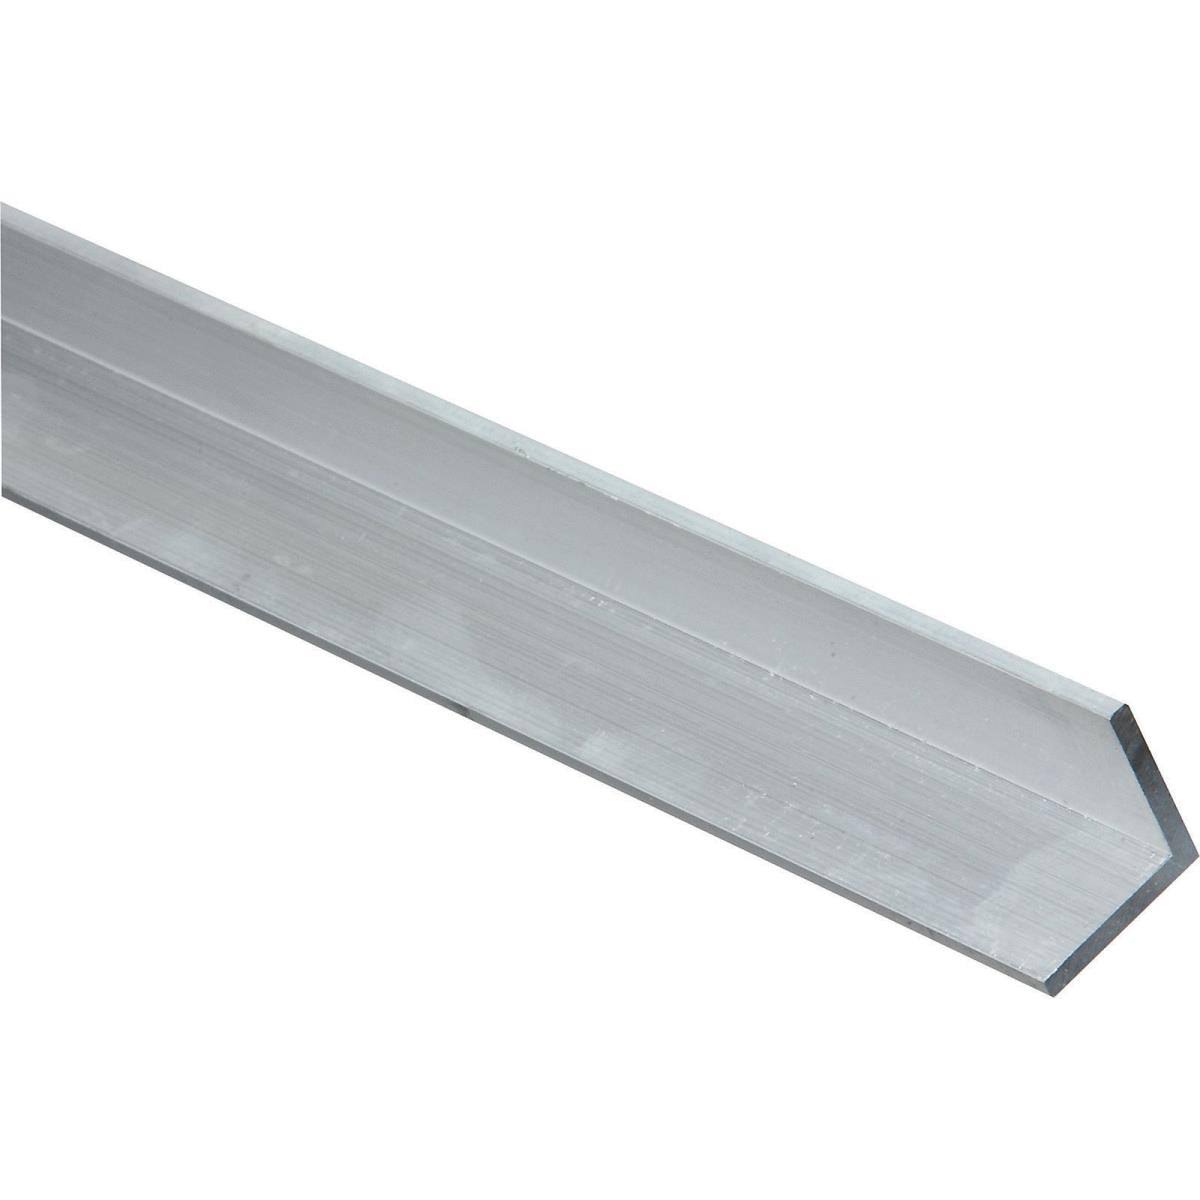 Stanley Hardware Solid Aluminum Angle - 1/8"x1"x4"